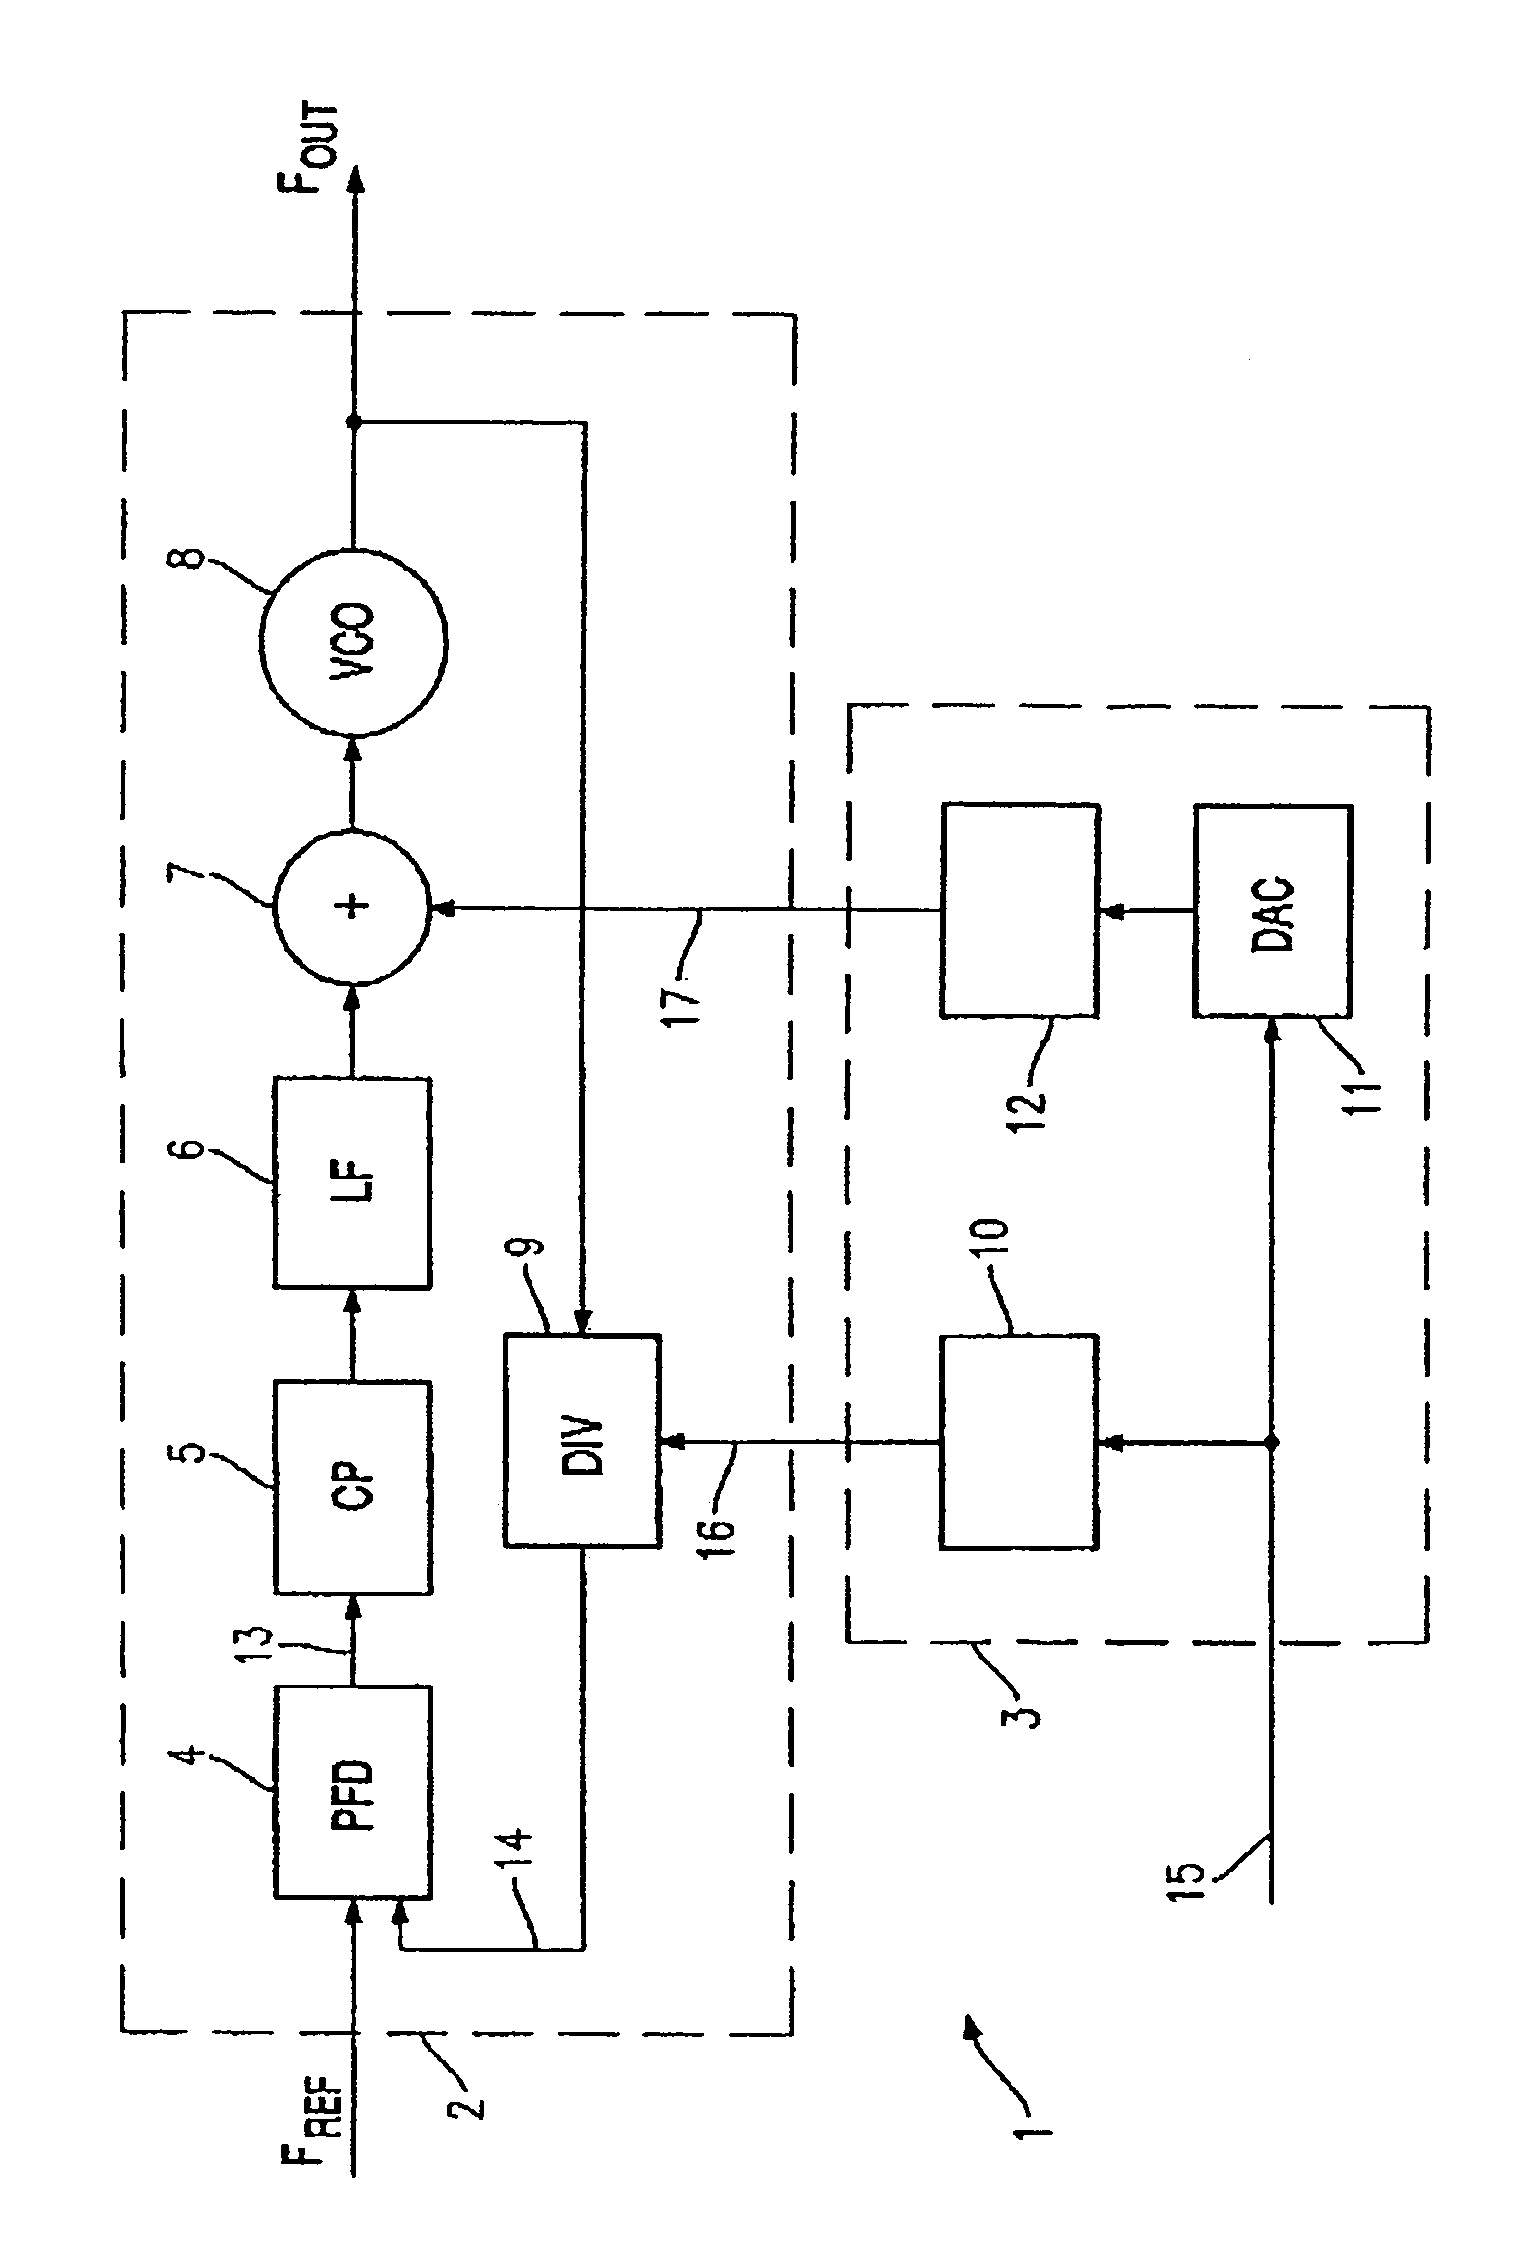 Two-point modulator comprising a PLL circuit and a simplified digital pre-filtering system